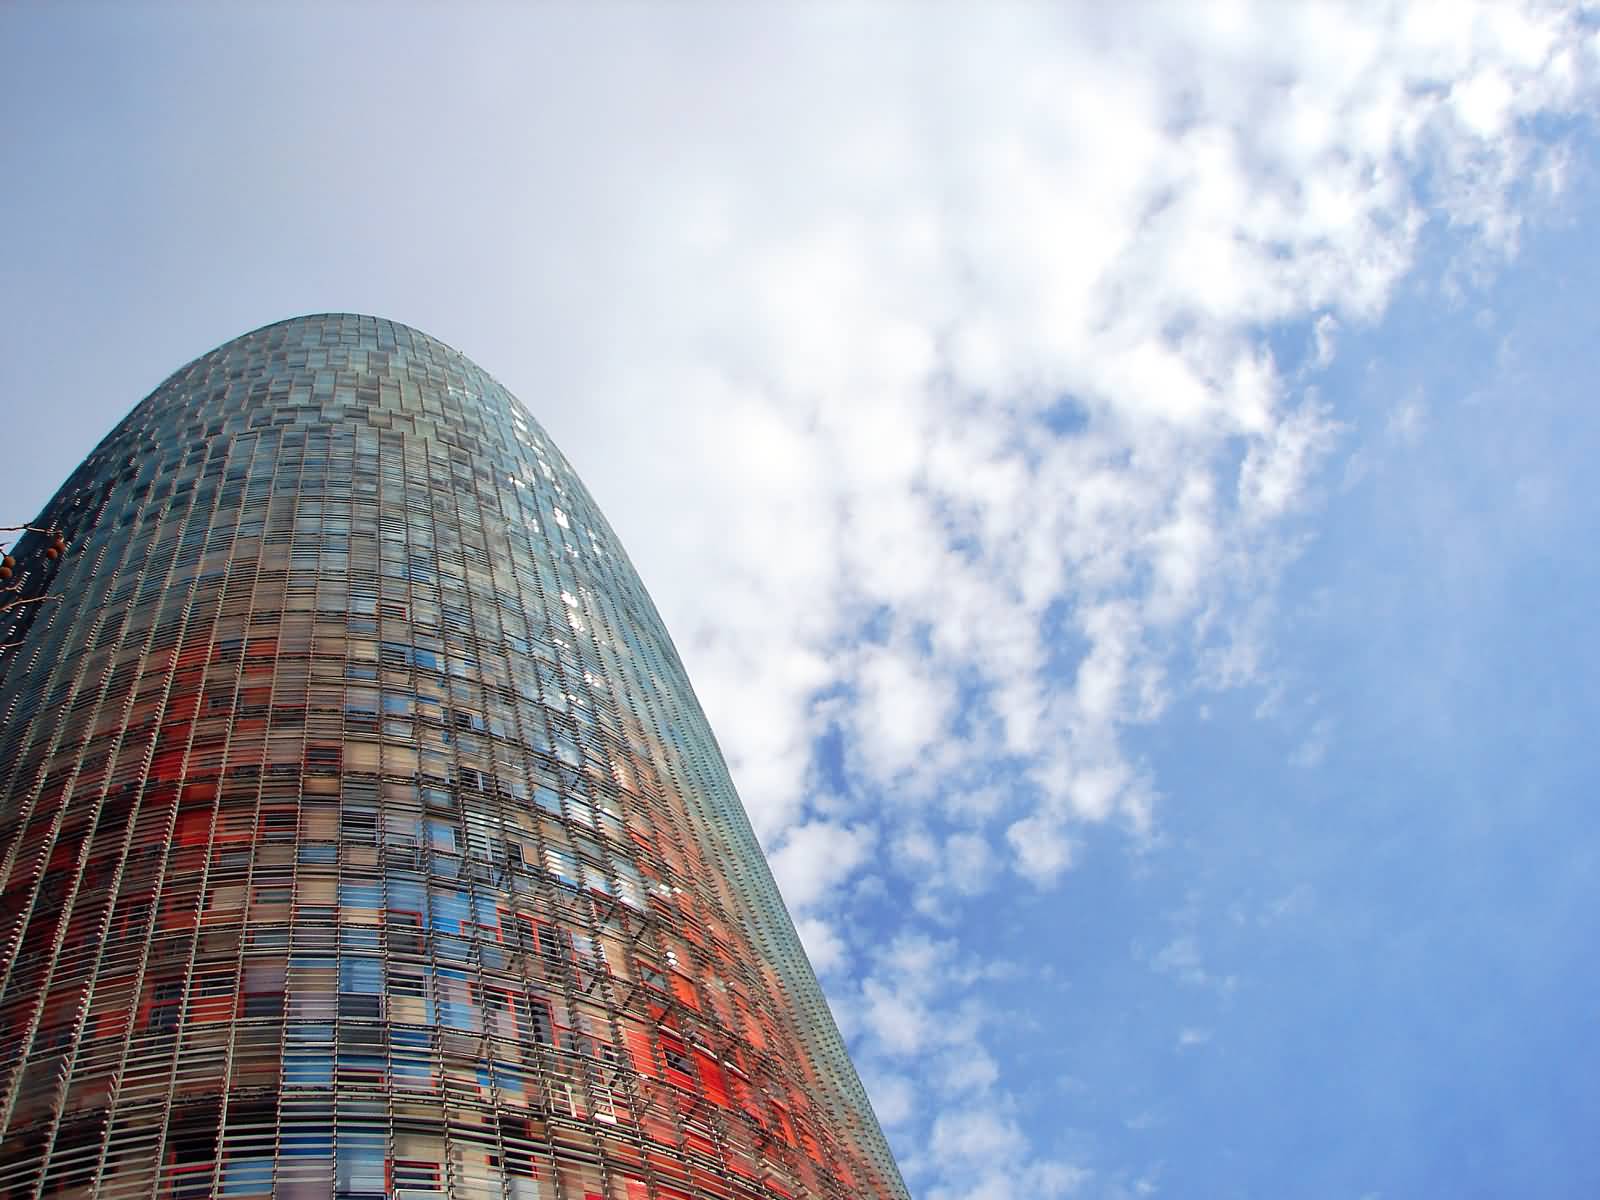 Torre Agbar View From Below